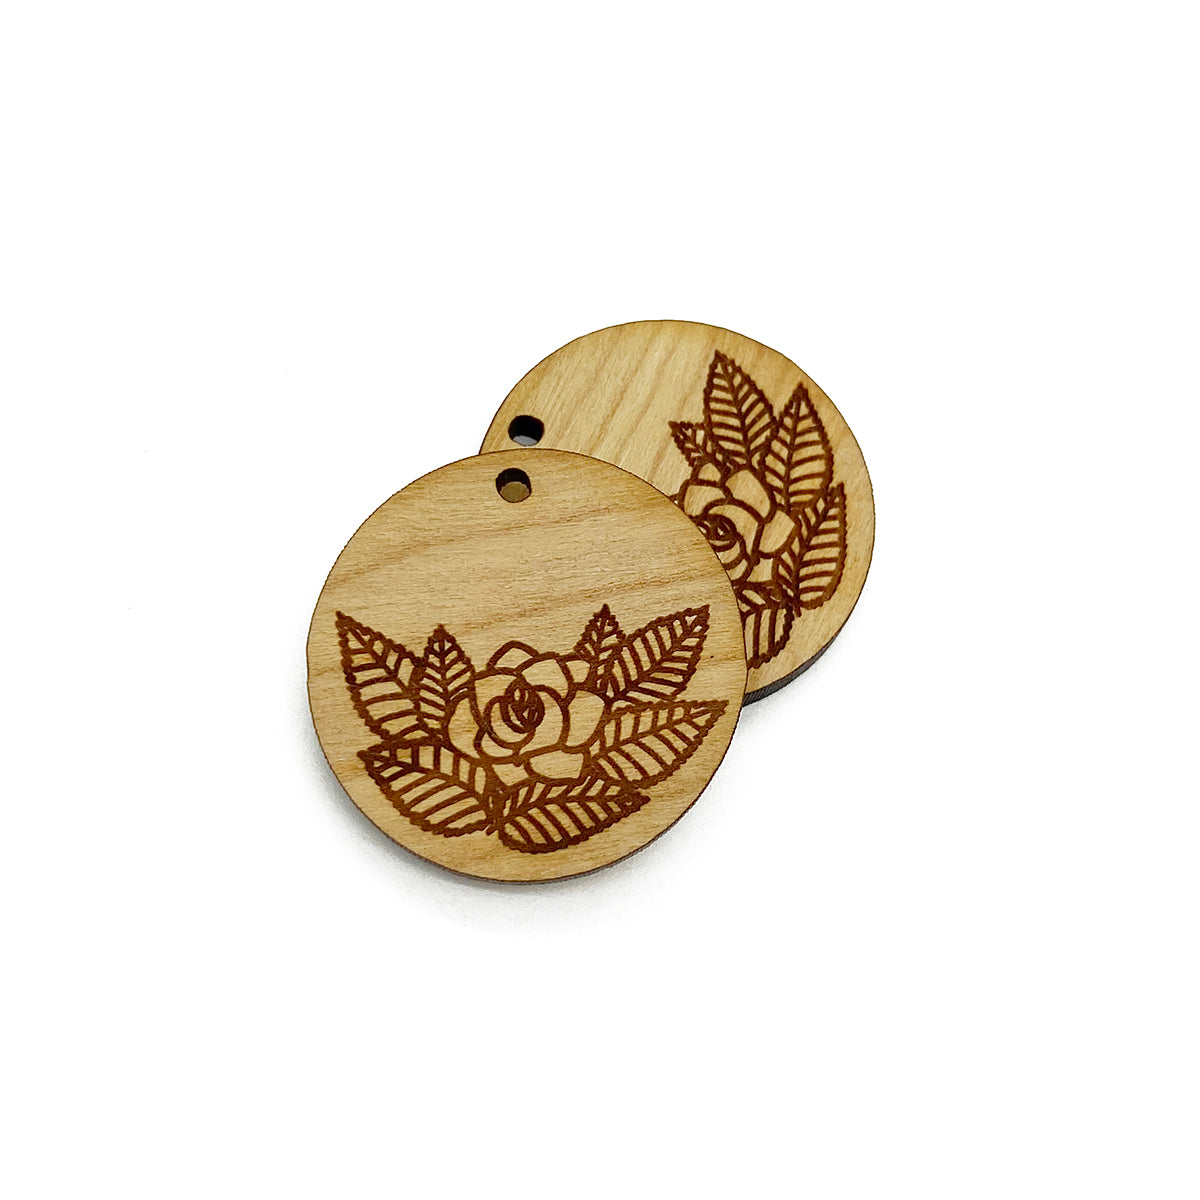 Rose & Leaves Engraved Circle Shaped Wood Jewelry Charm Blanks